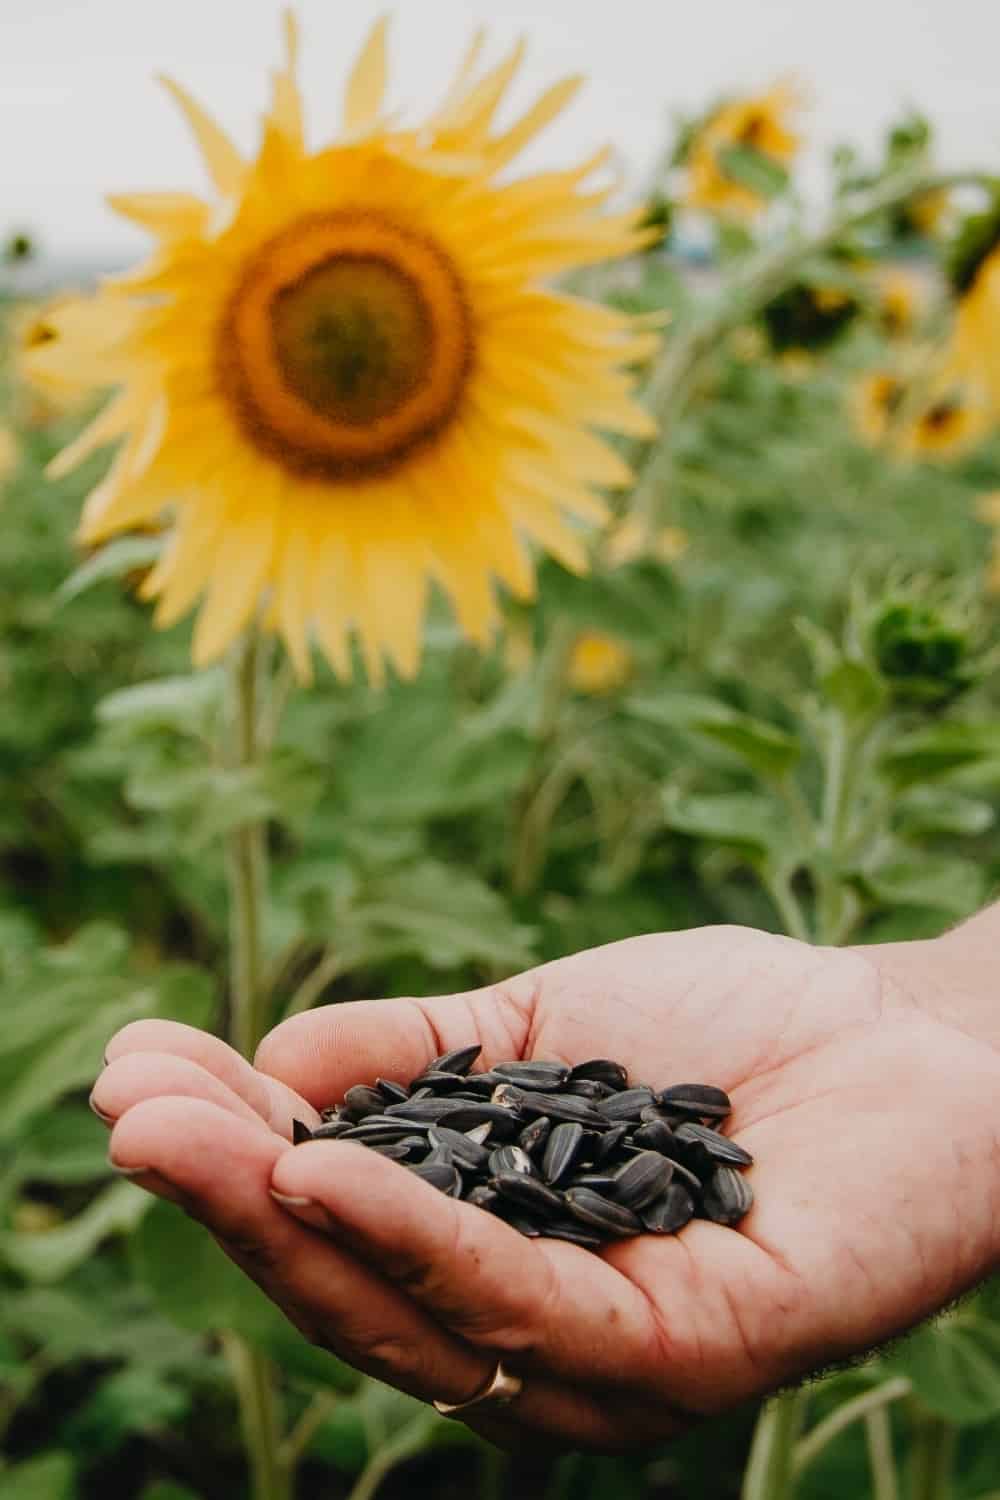 Sunflower seeds in hand close up against the background of blooming sunflowers